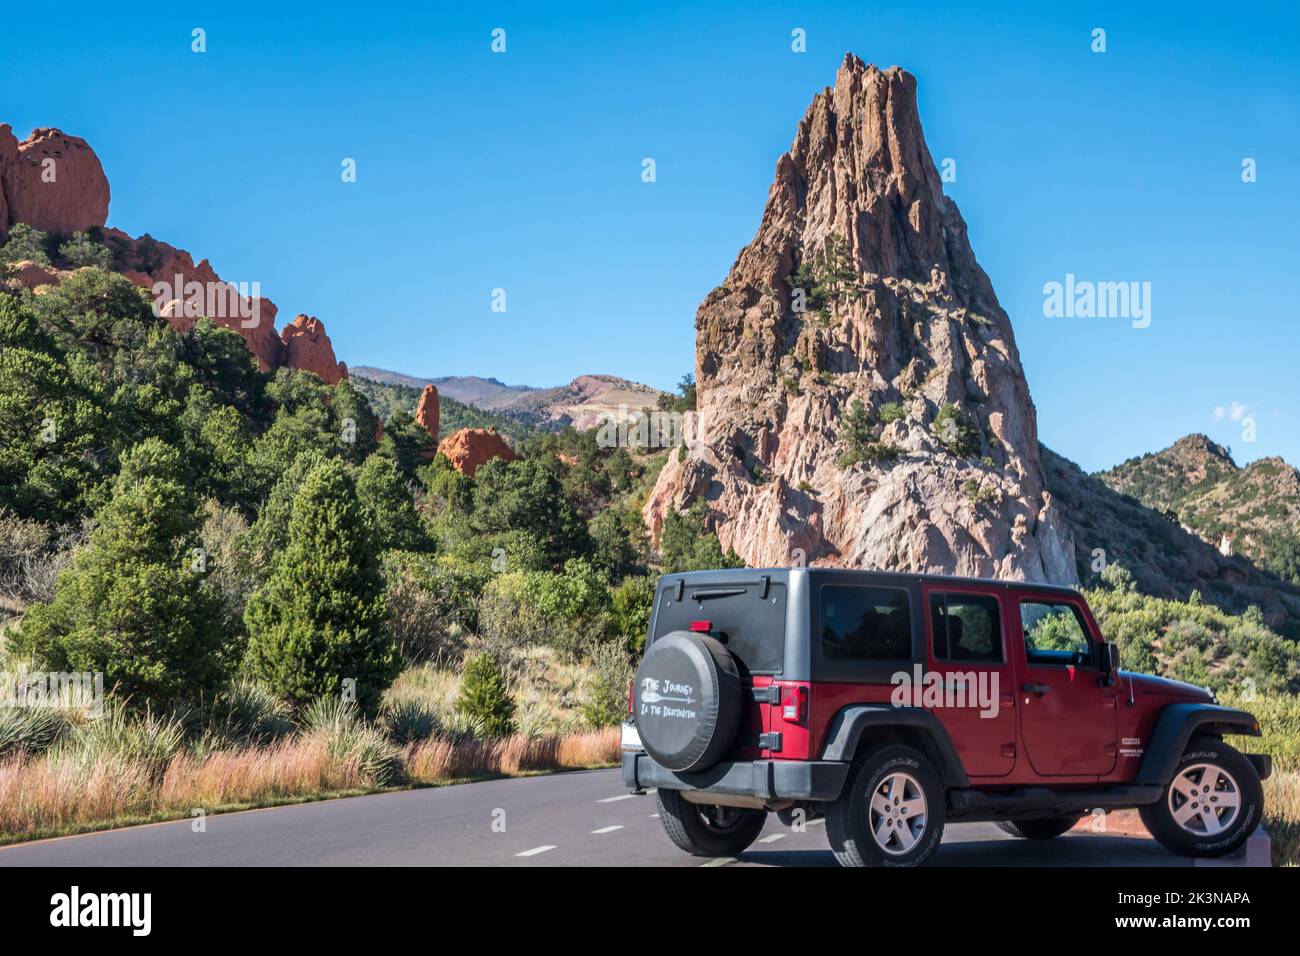 The famous off-road Jeep vehicle in Garden of the Gods, Colorado Stock Photo